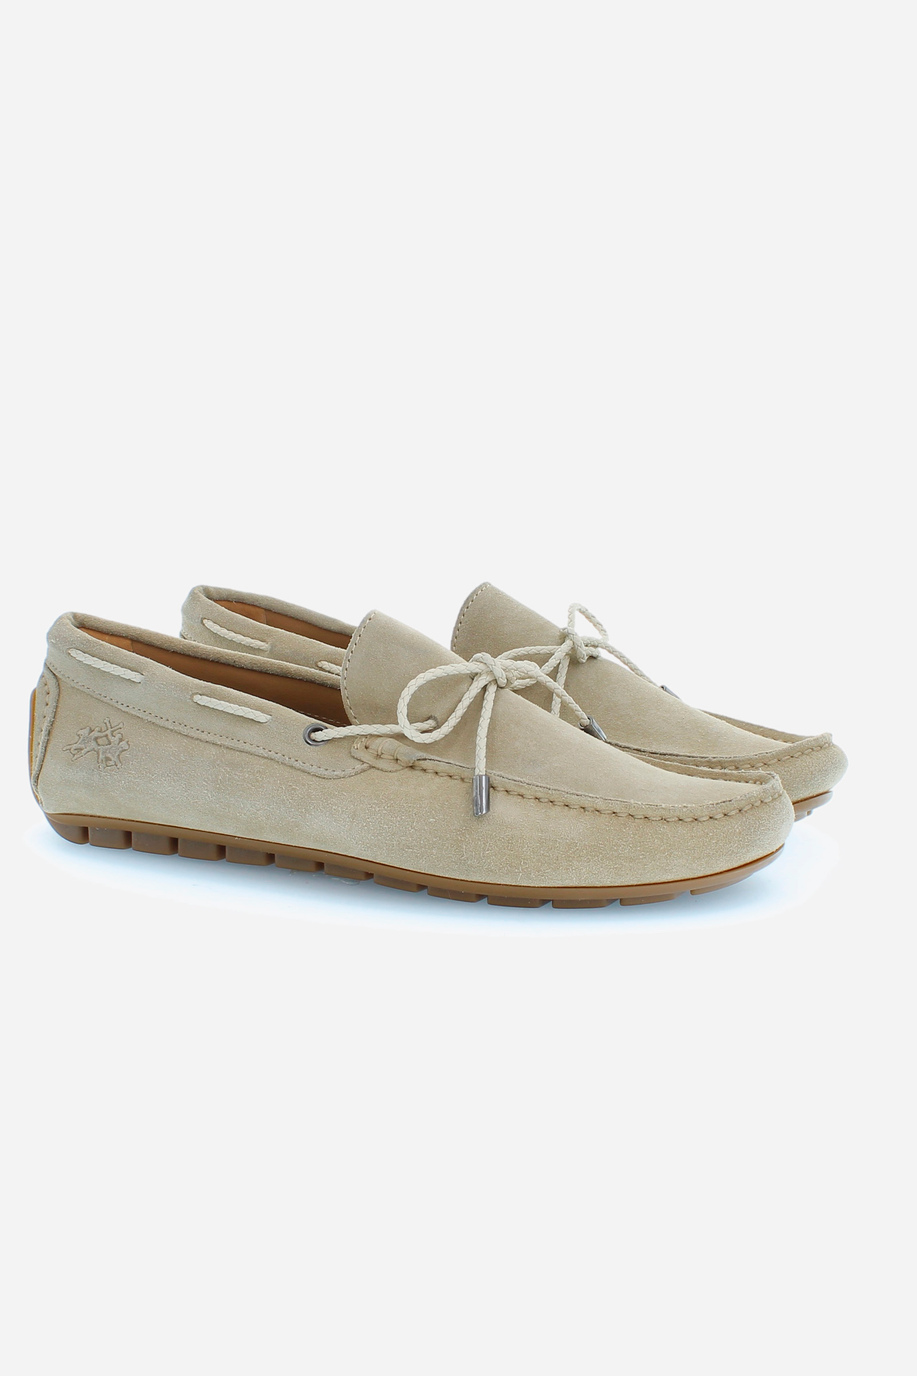 Men's suede loafers with laces - Footwear | La Martina - Official Online Shop